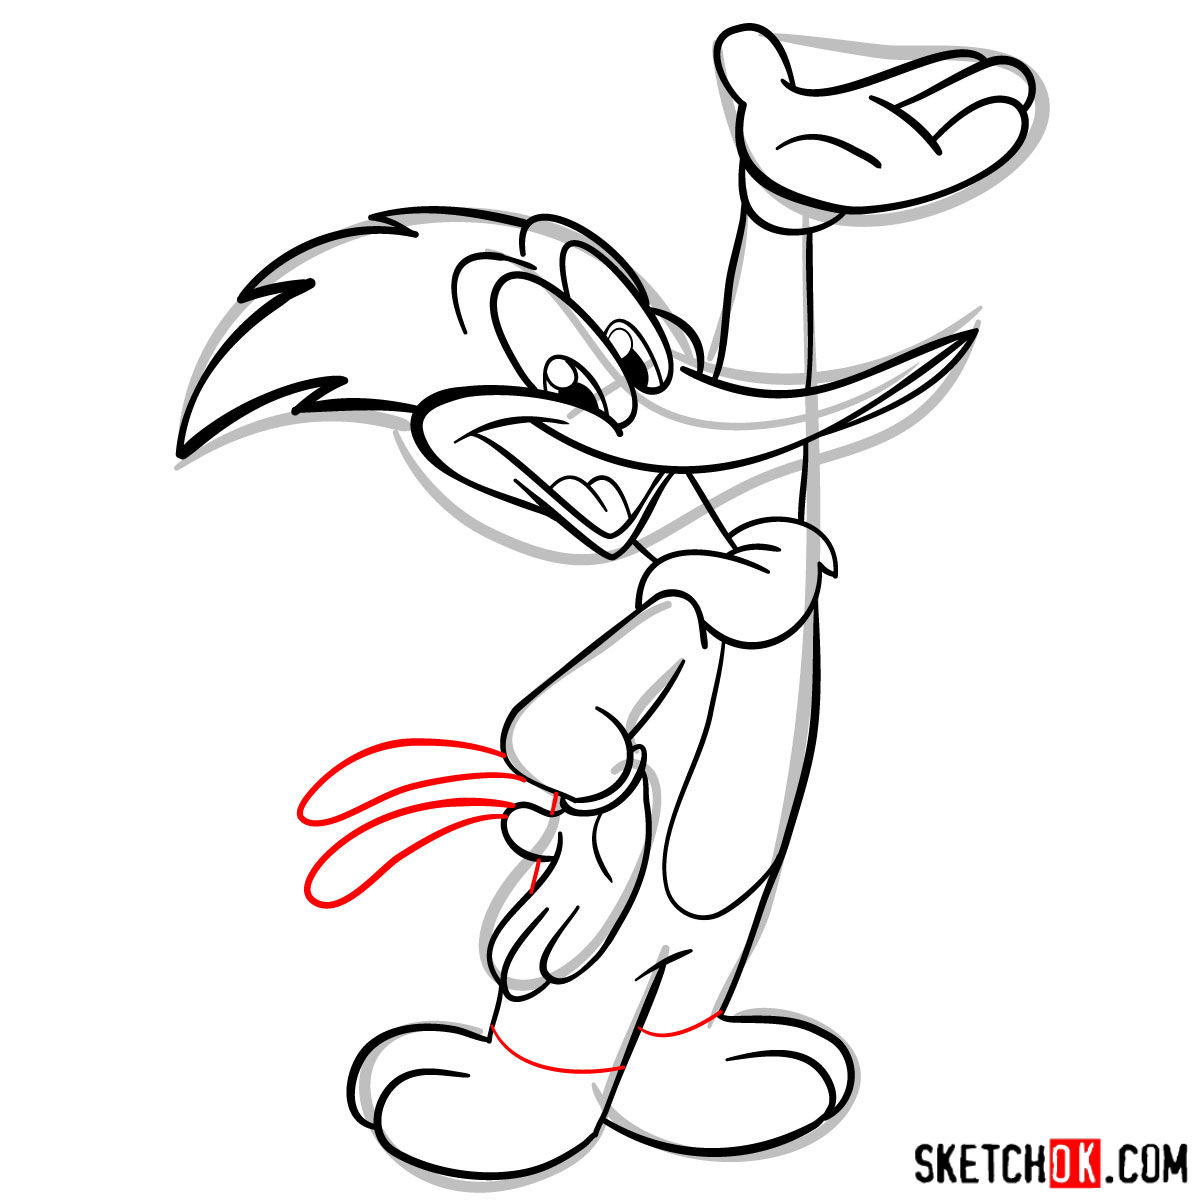 How to draw Woody Woodpecker - step 10